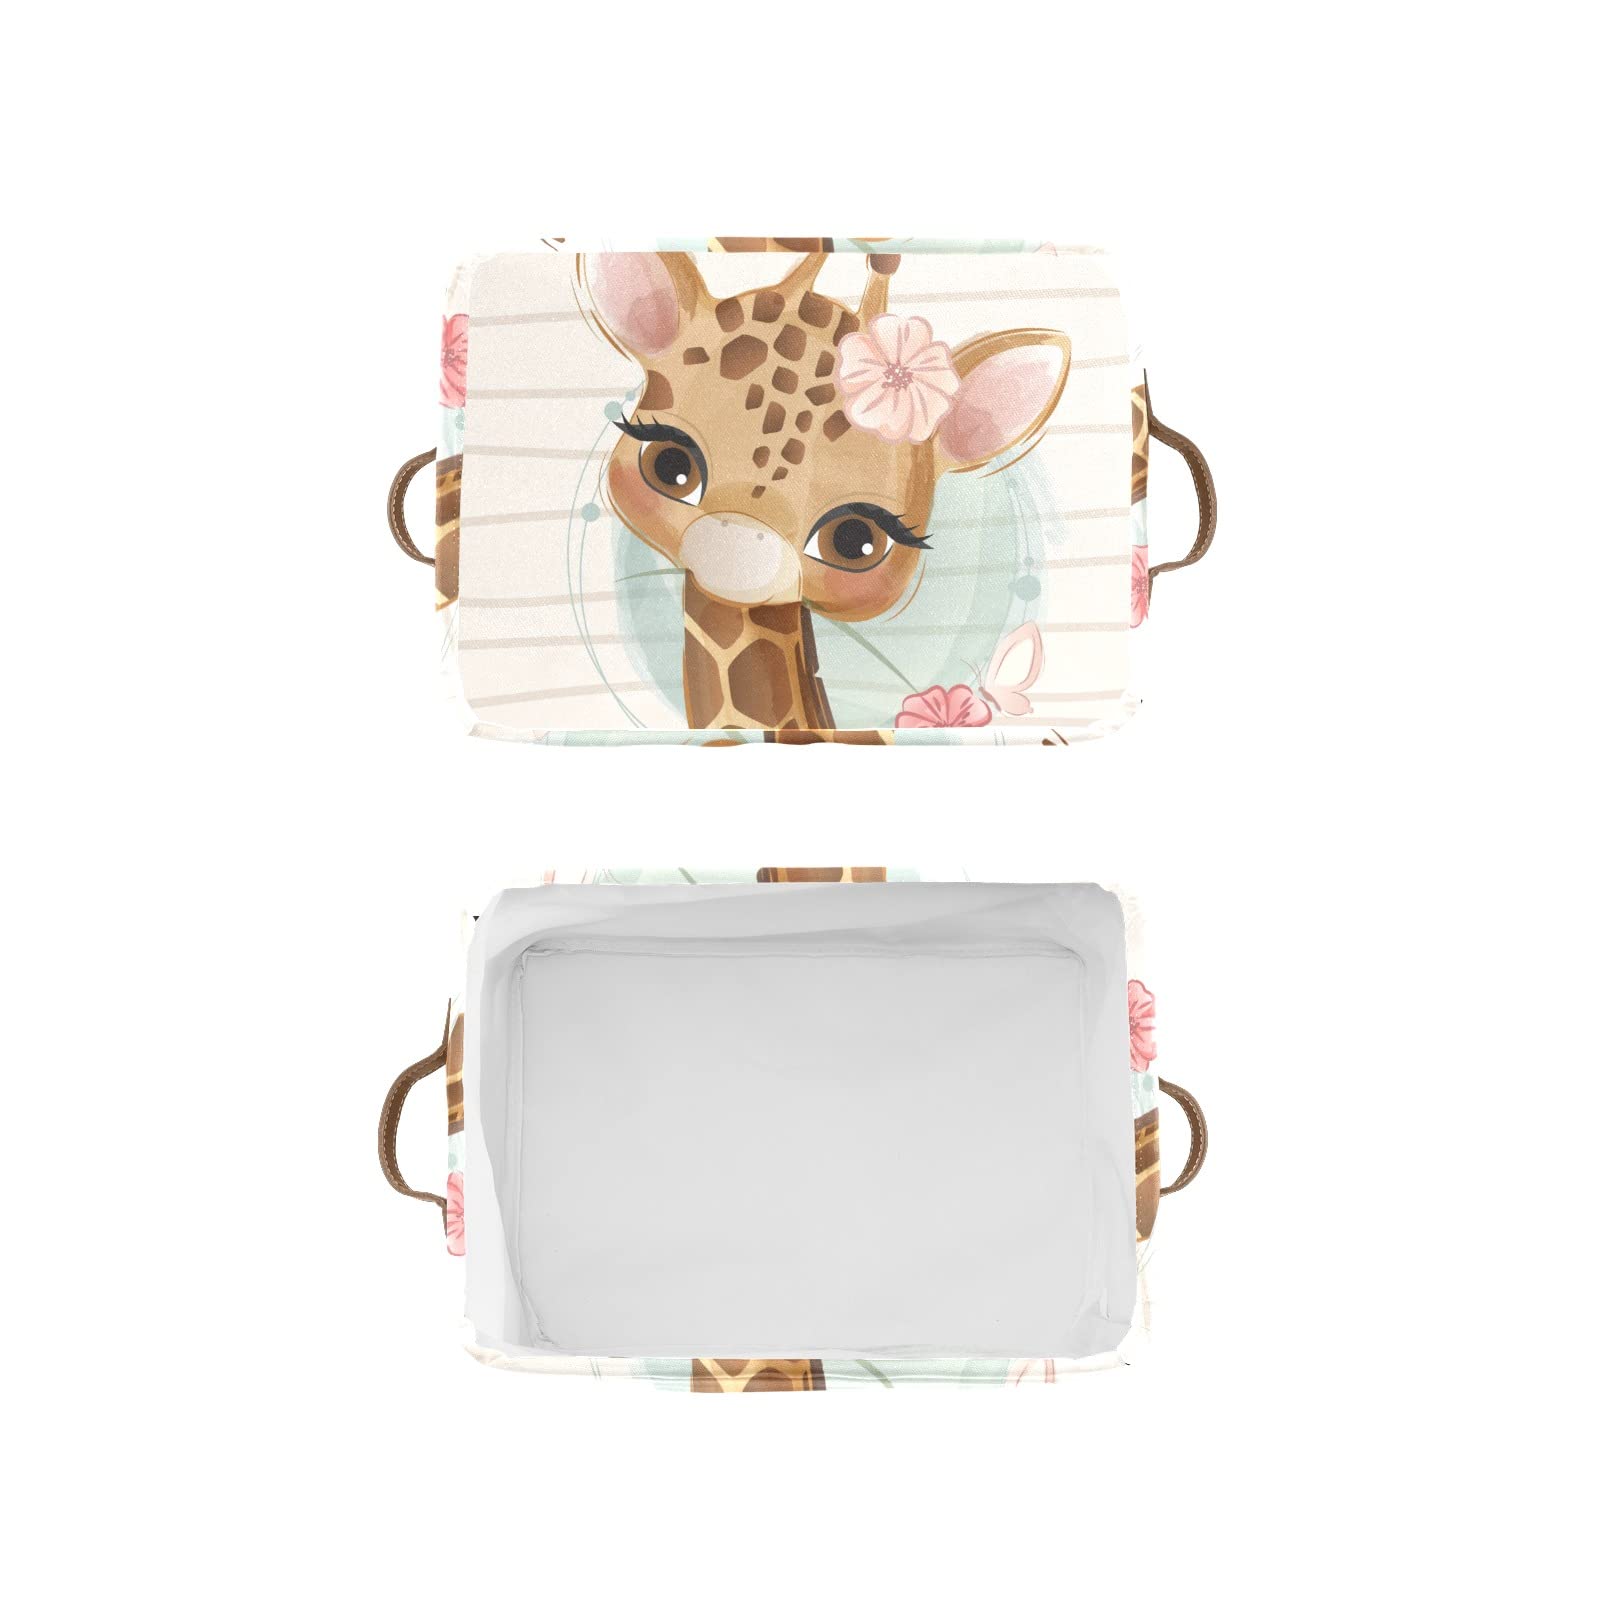 Giraffe Flower Personalized Custom Name Waterproof Storage Boxs Baskets Clothts Towel Book for Bathroom Office 1 Pack